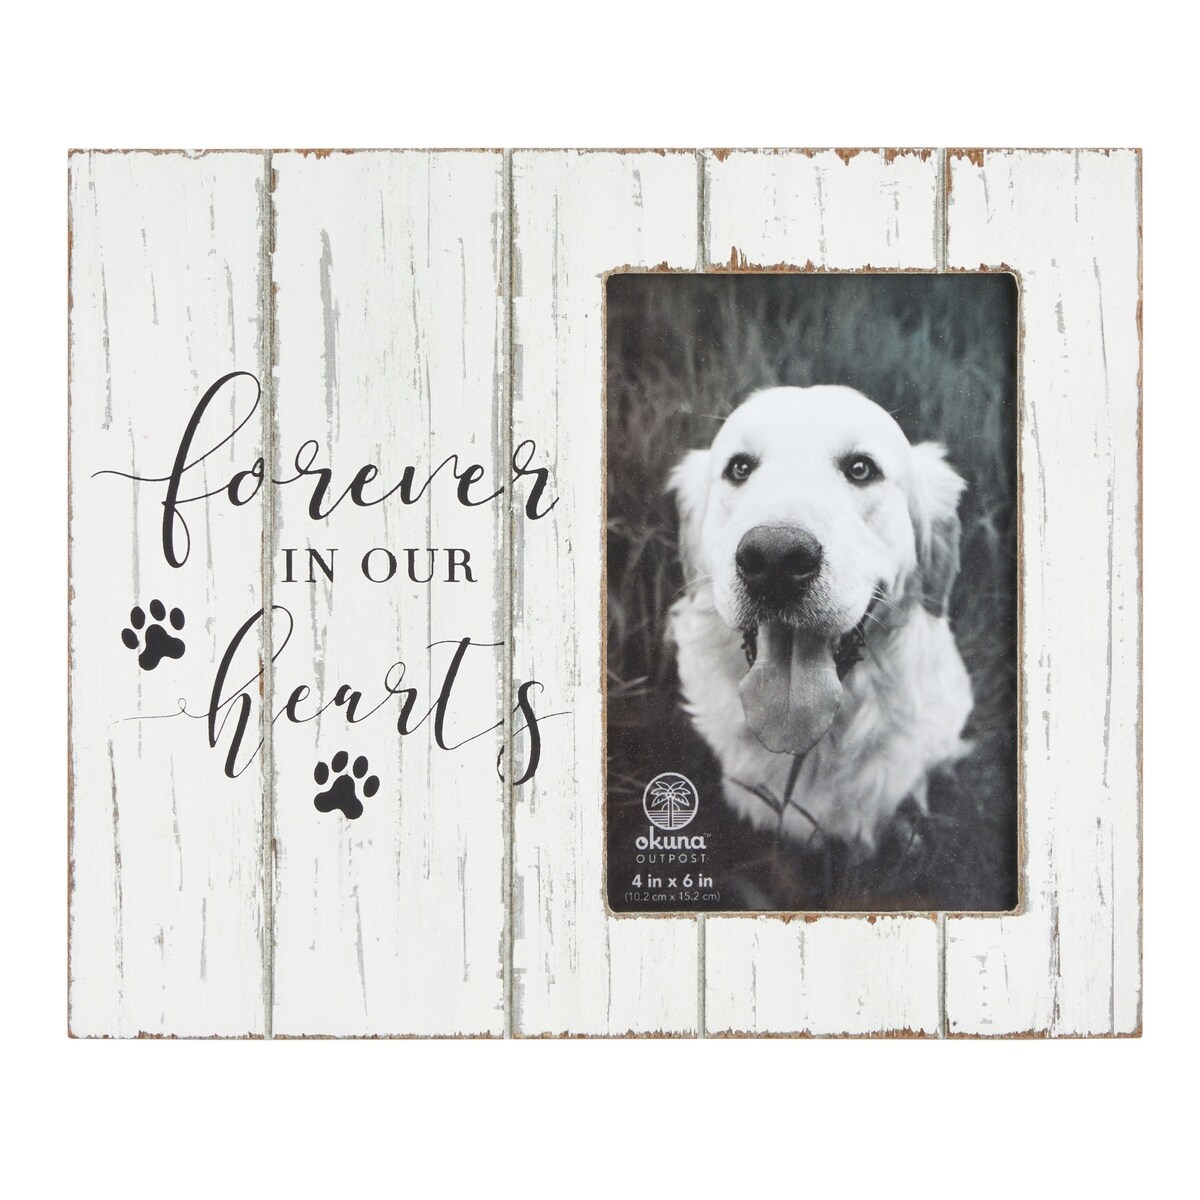 Rustic-Style Wooden Pet Memorial Picture Frame, 9.5x7.9-Inch Sentimental  Dog Photo Frame to Memorialize Pets That Have Passed On, Forever In Our